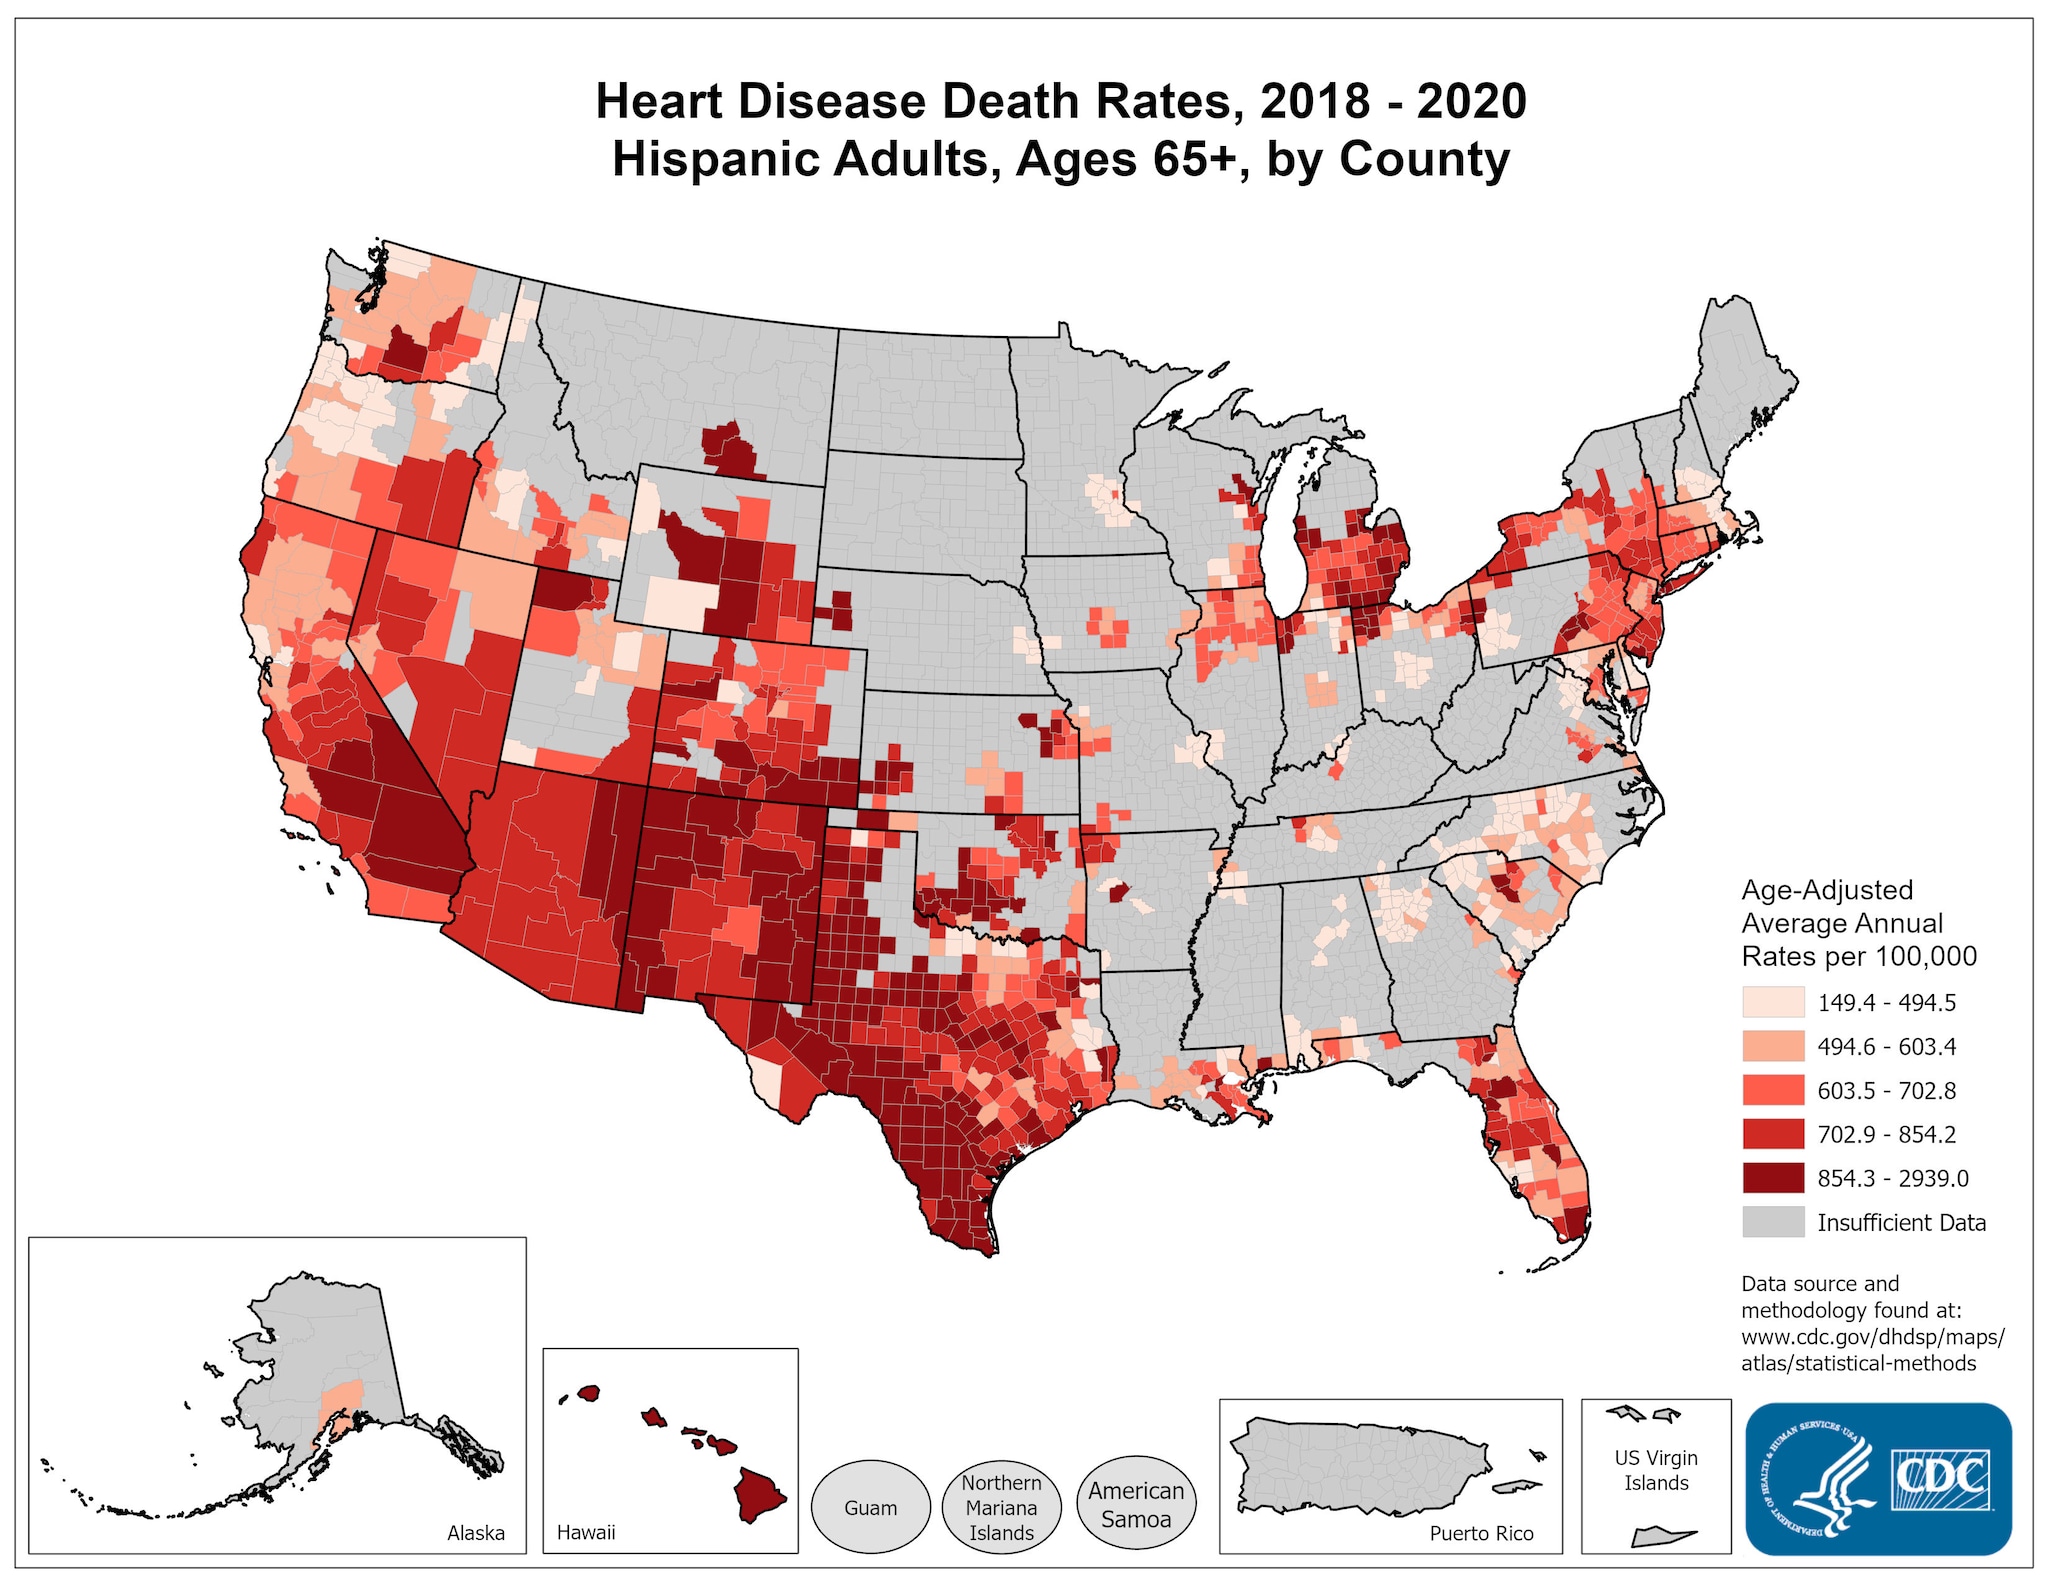 Heart Disease Death Rates for 2018 through 2020 for Hispanics Aged 65 Years and Older by County